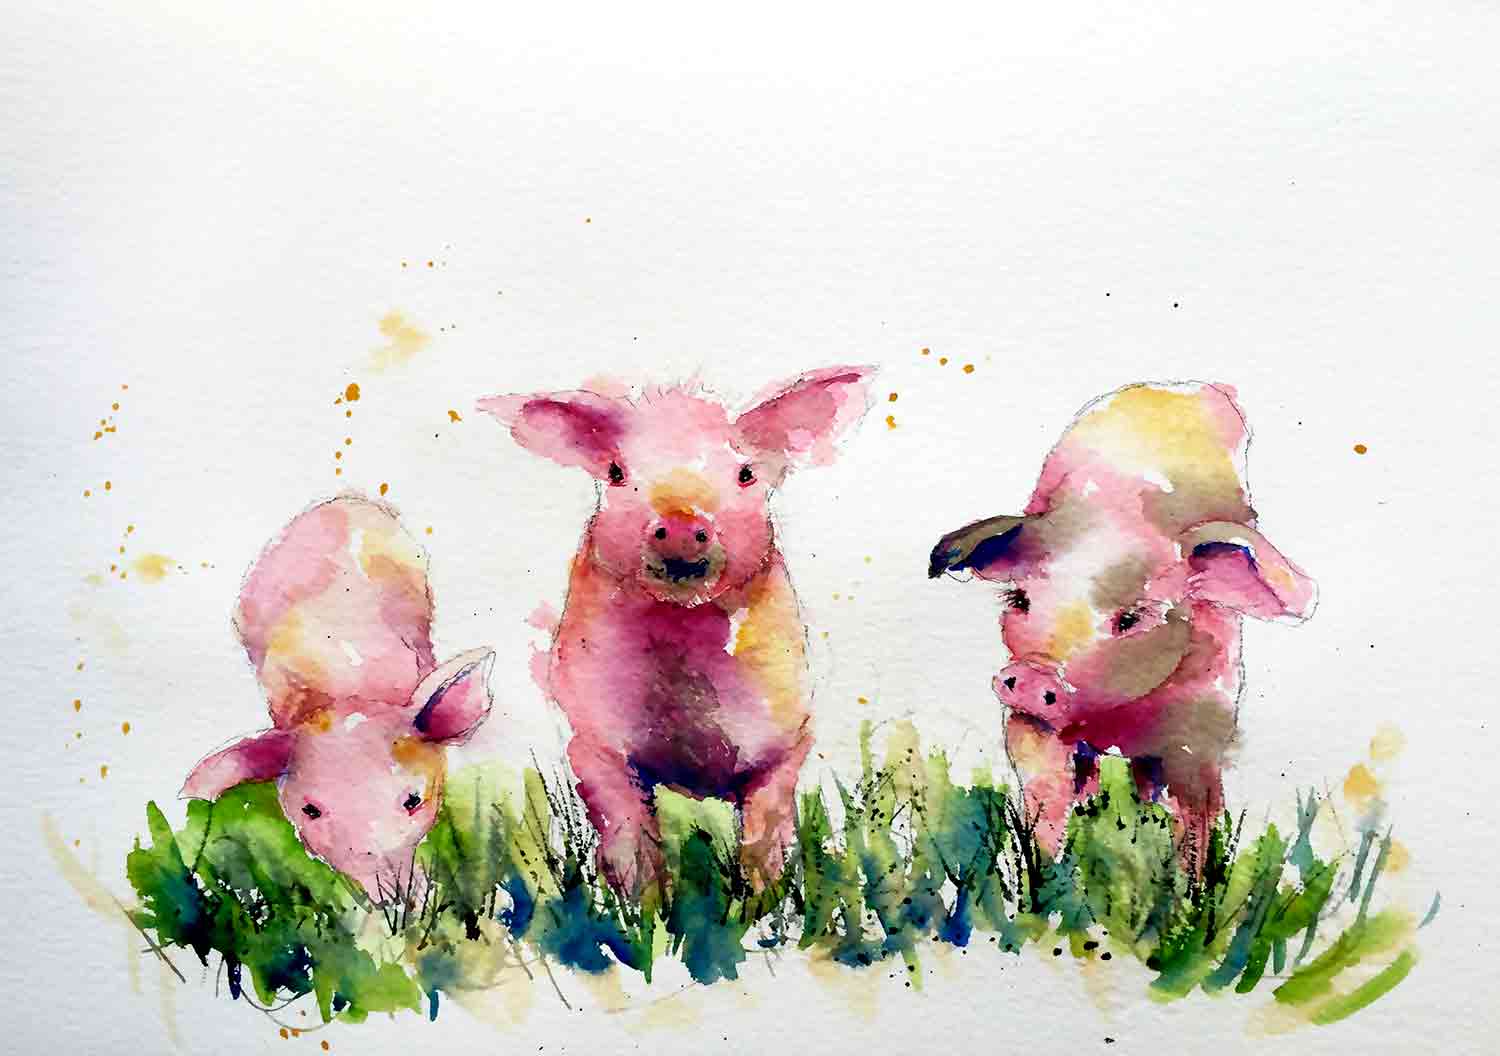 Painting farm animals with spirit (and watercolour) — Kerrie Woodhouse